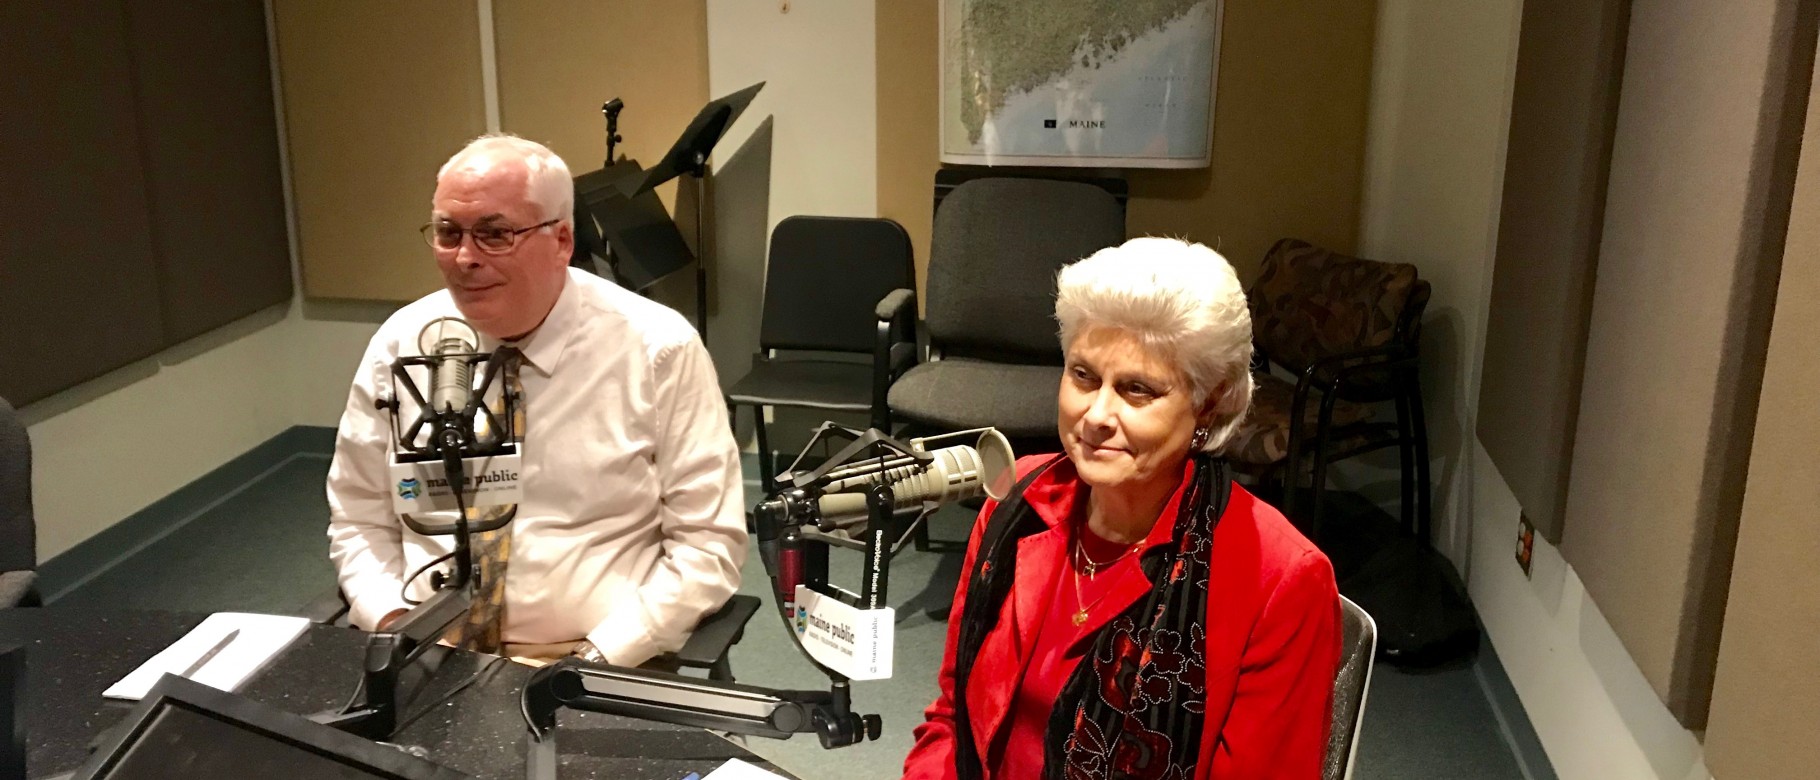 Tom Meuser and Marilyn Gugliucci were guest panelists on Maine Calling's program on centenarians